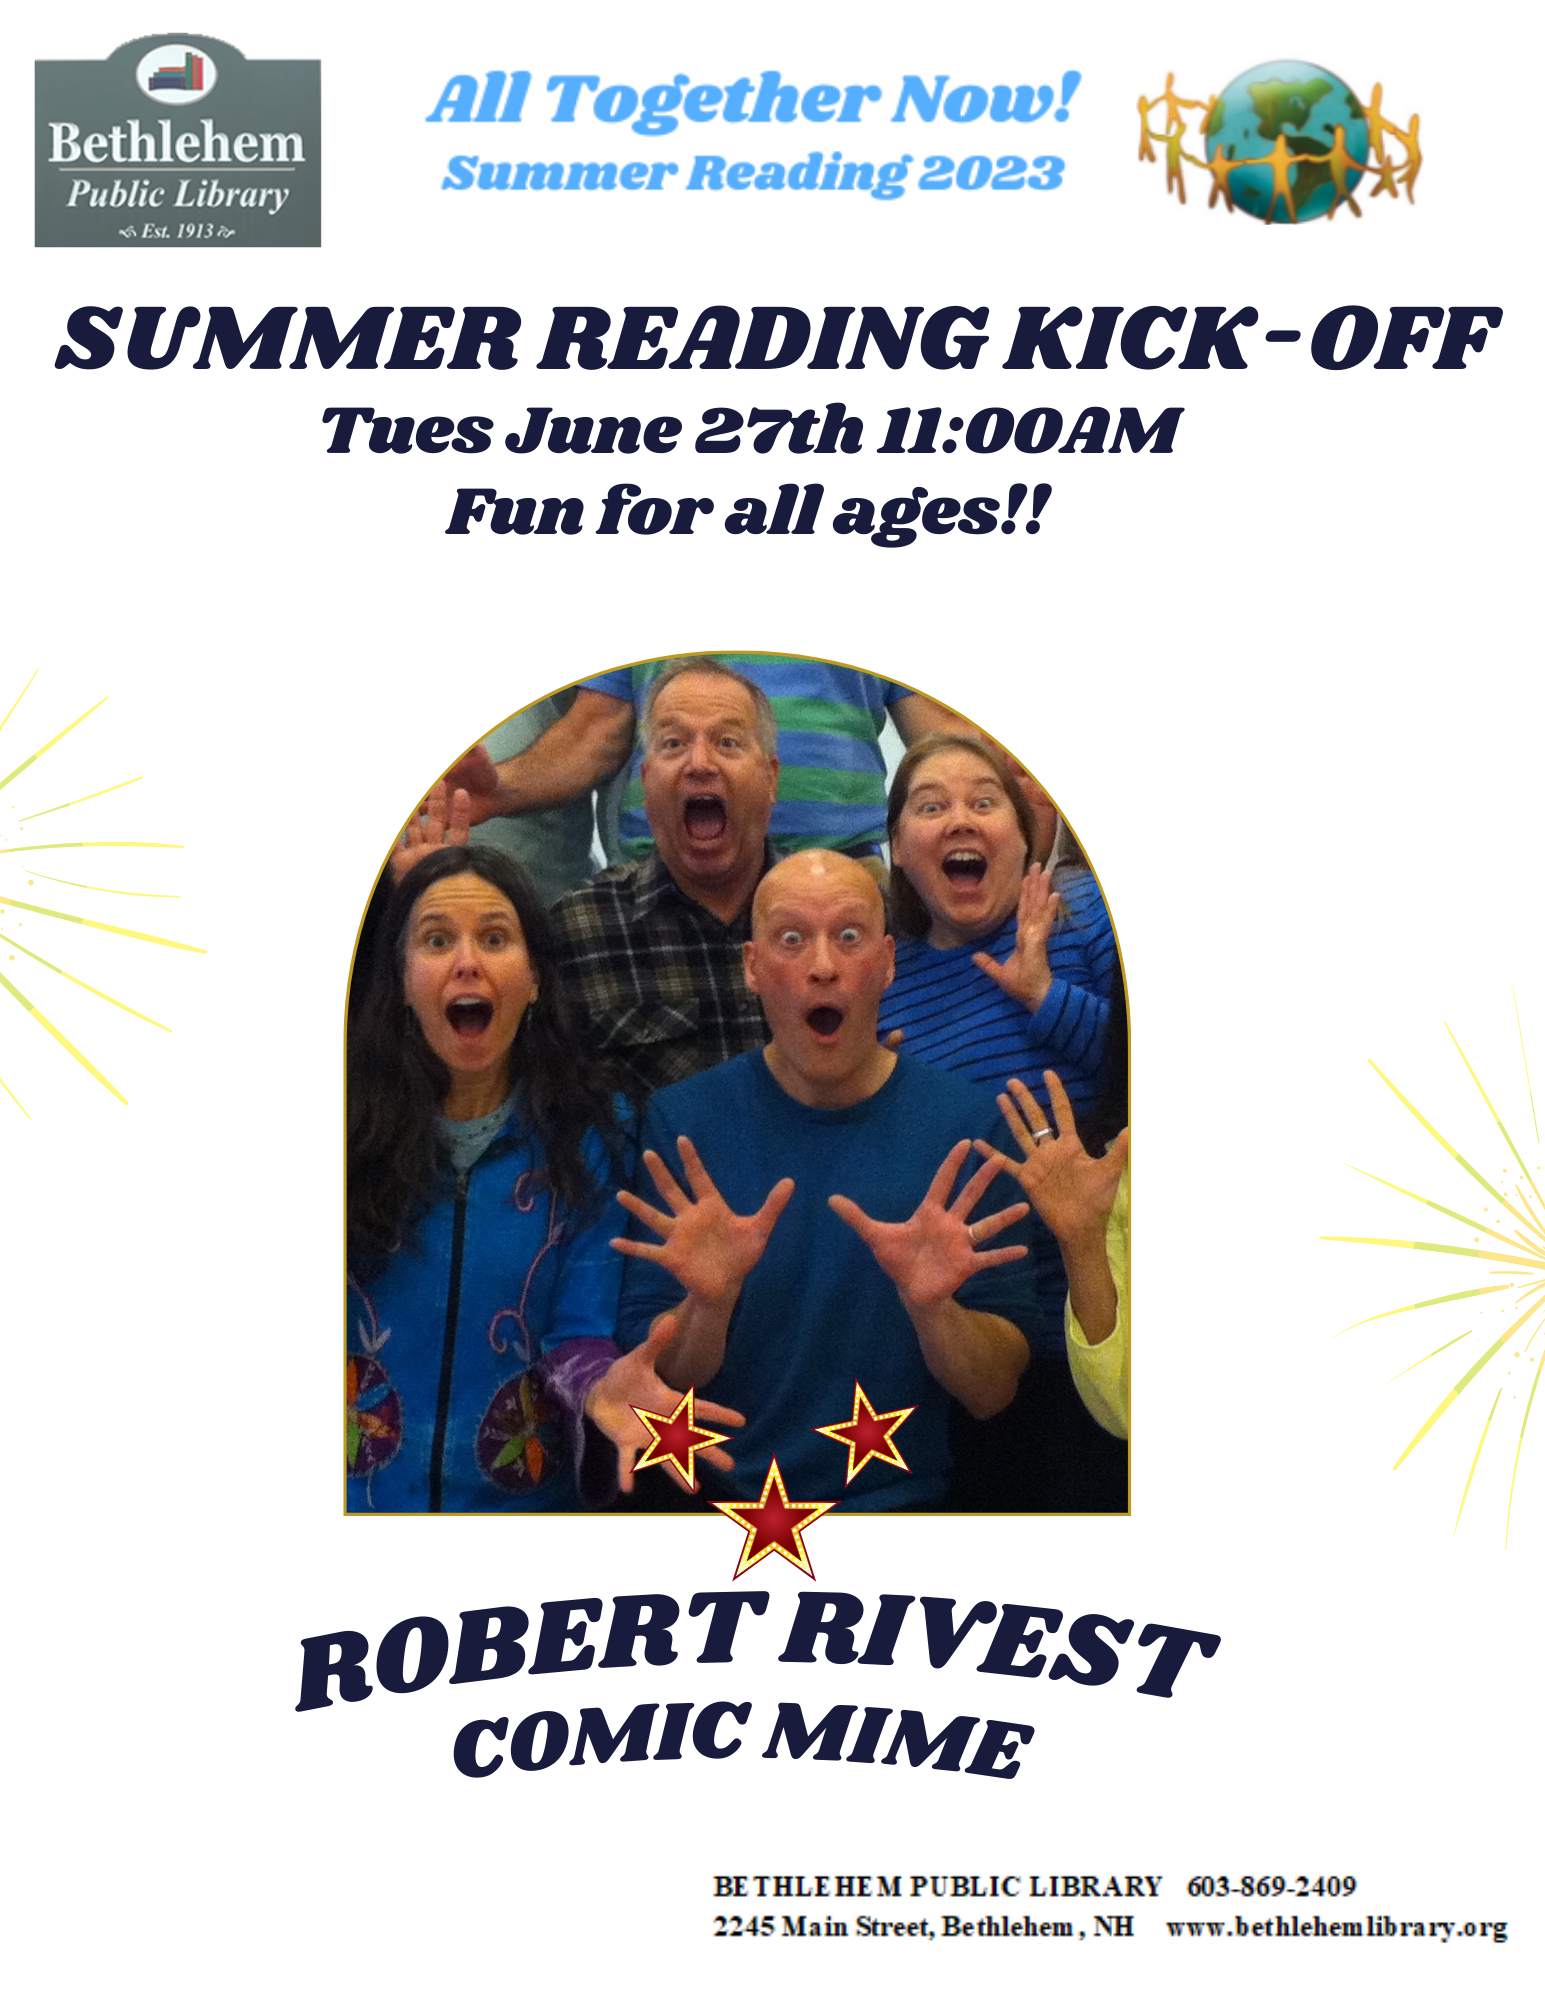 Summer Reading Program Kick-Off Tuesday, June 27th 11am In our Back Yard Robert Rivest, Comic & Mime, combines classic mime artistry with hilarious character voices.  This is the kick-off to the Library’s summer programming.    See our website for all the details!